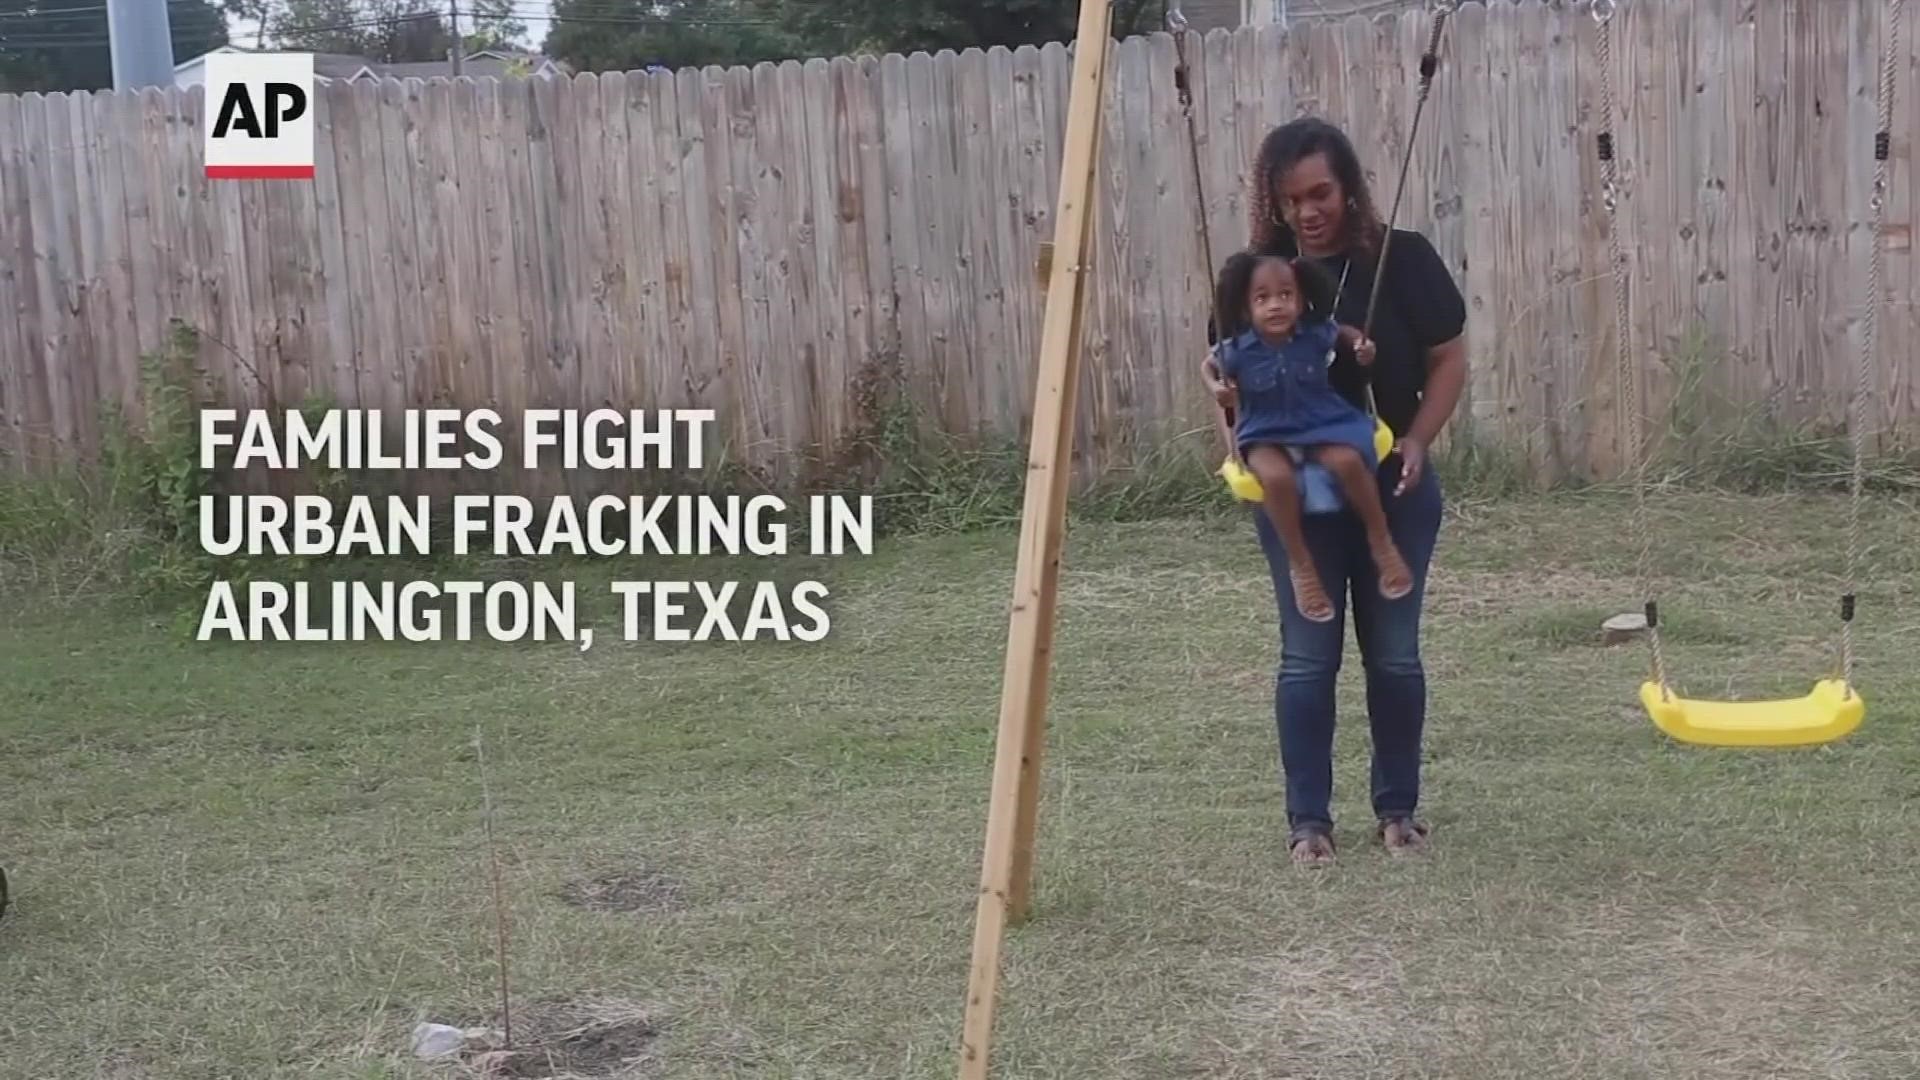 Fracking has been banned in France. So companies like French energy giant Total have come to places like Texas, where rules are much more conducive to drilling.